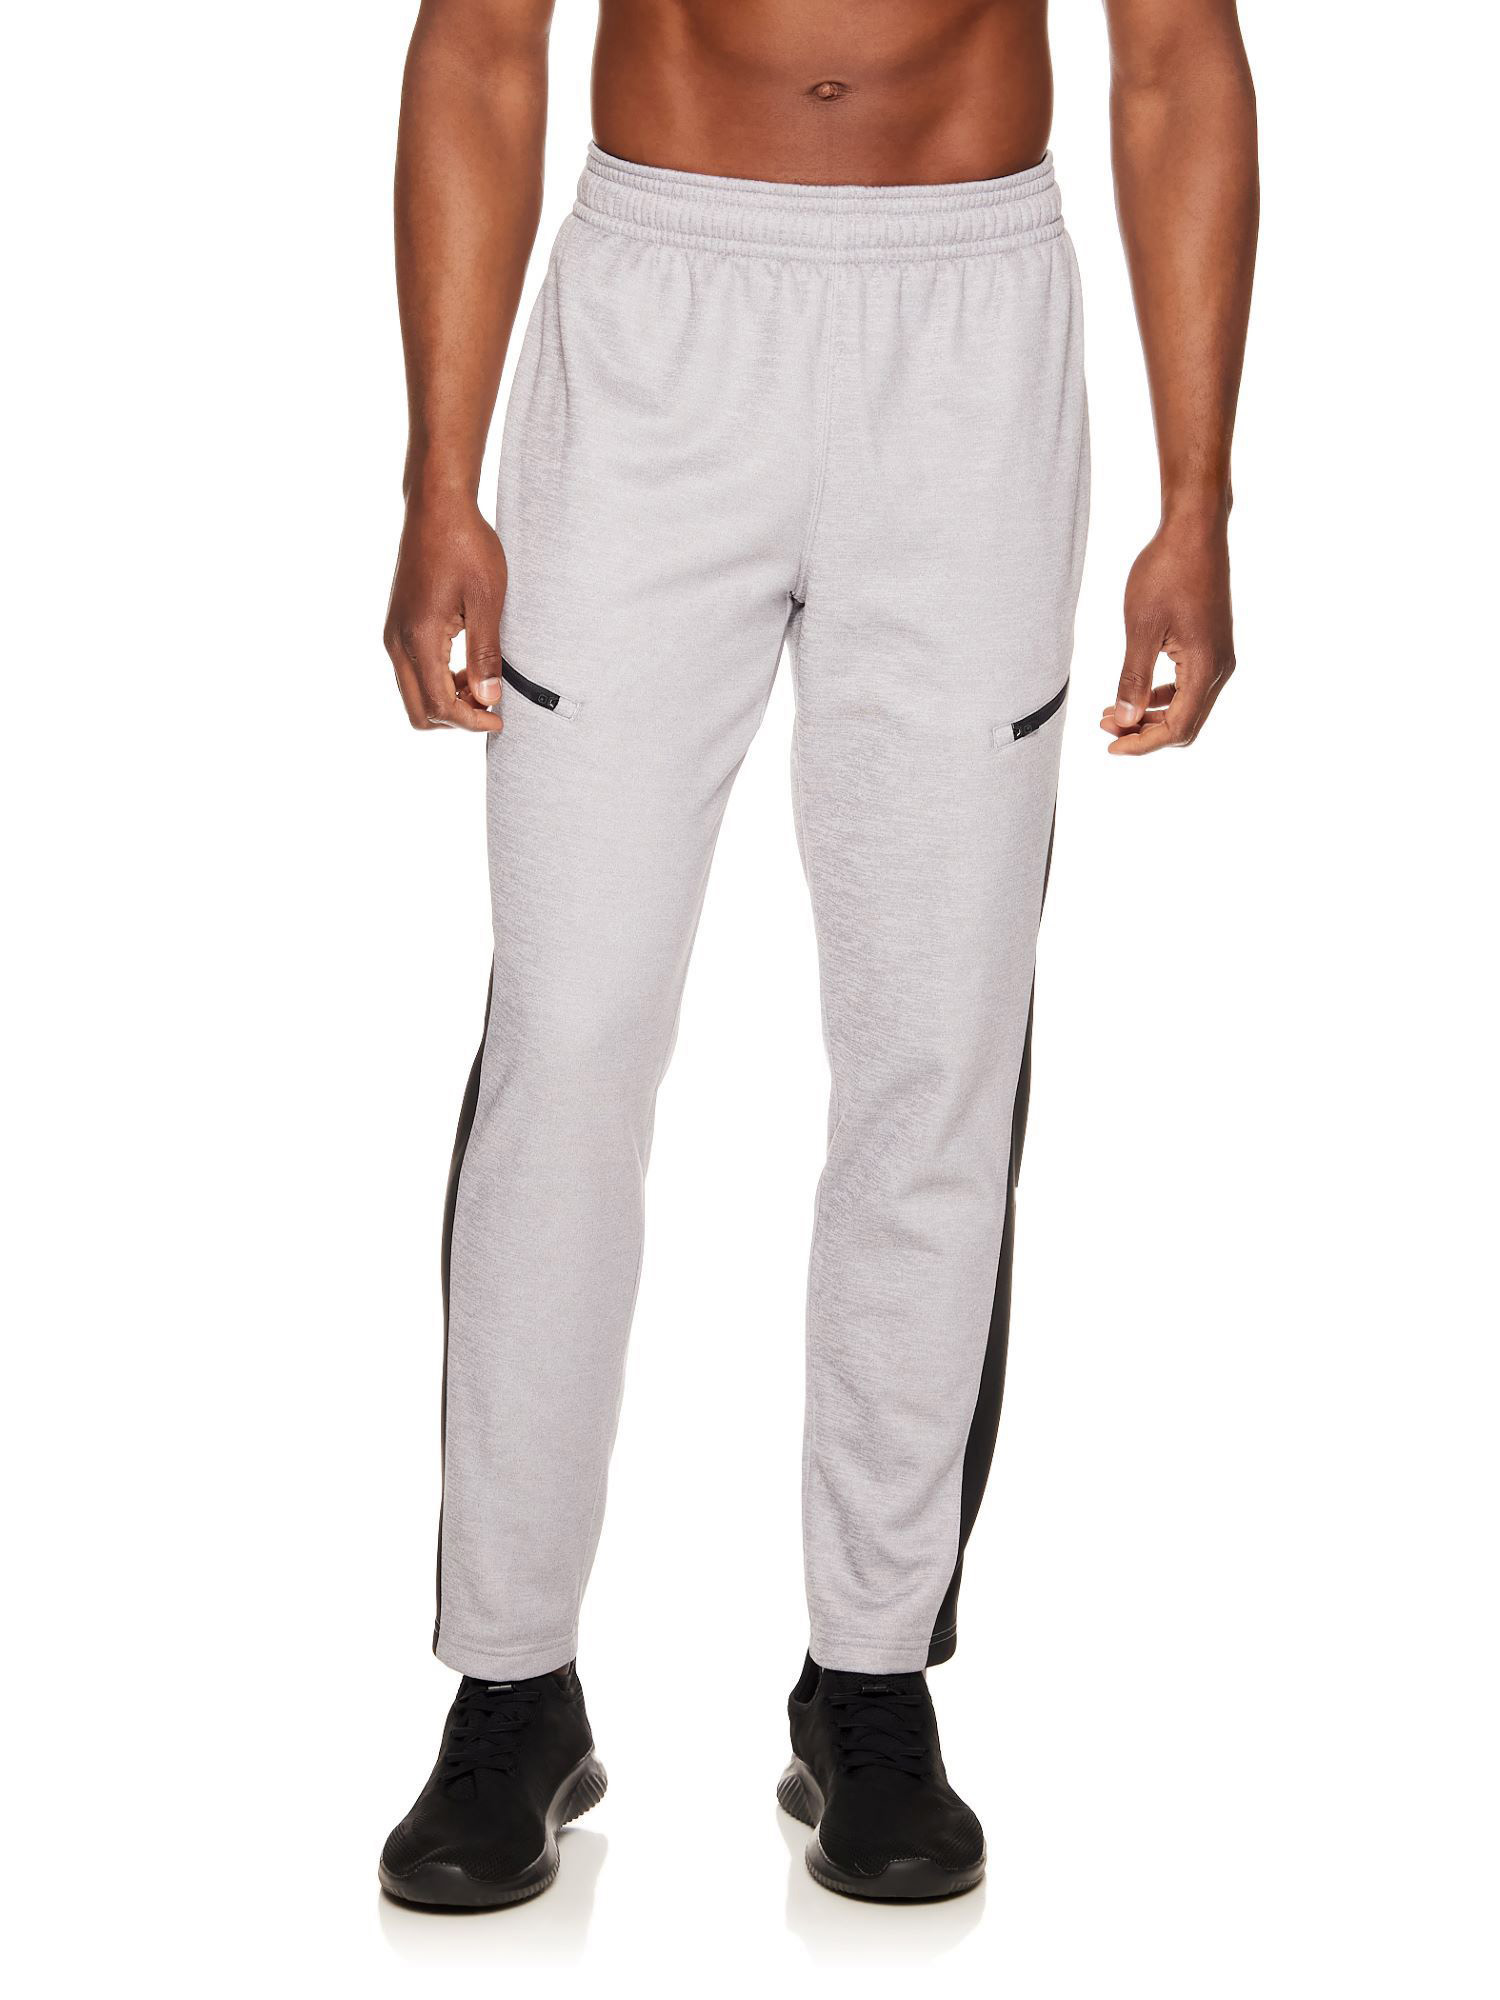 And1 Men's and Big Men's Deflection Pants, Sizes S-5X - image 1 of 4